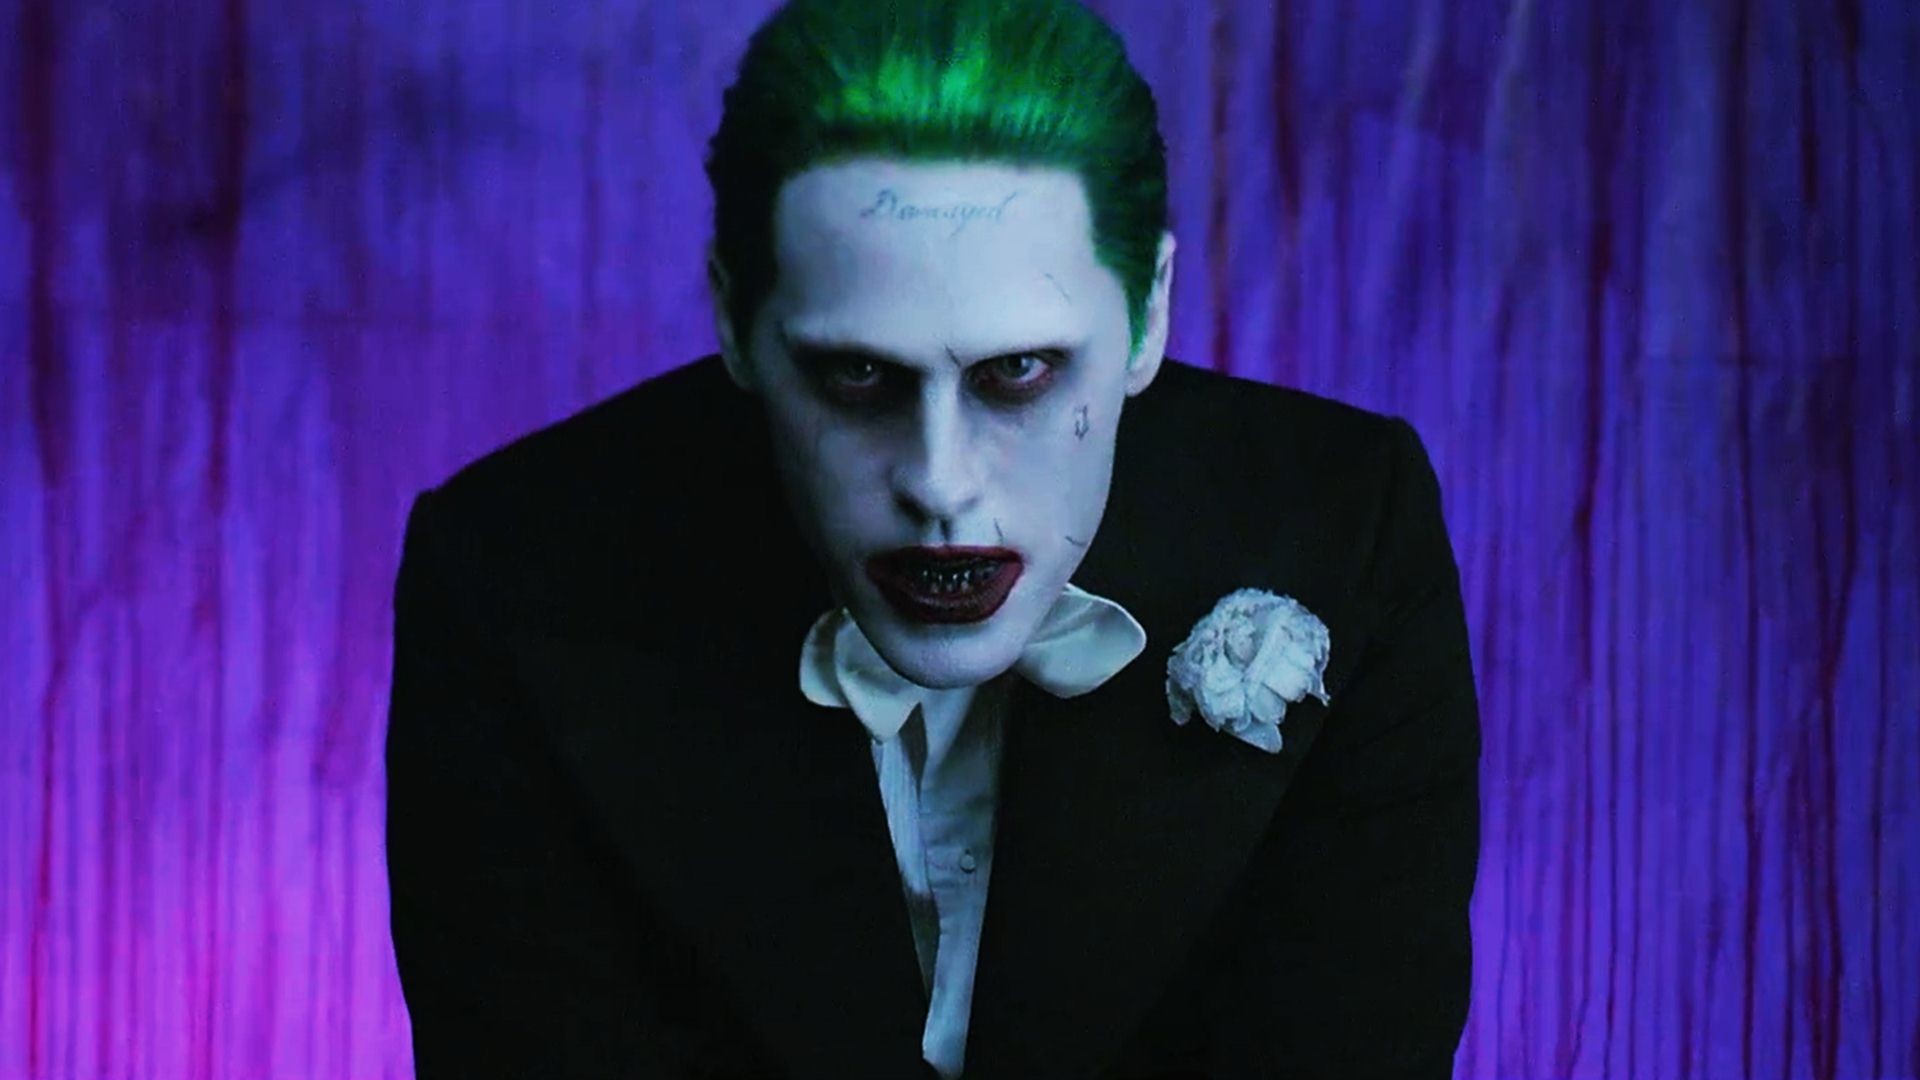 7. The Joker's blonde hair in the film "Suicide Squad" - wide 1